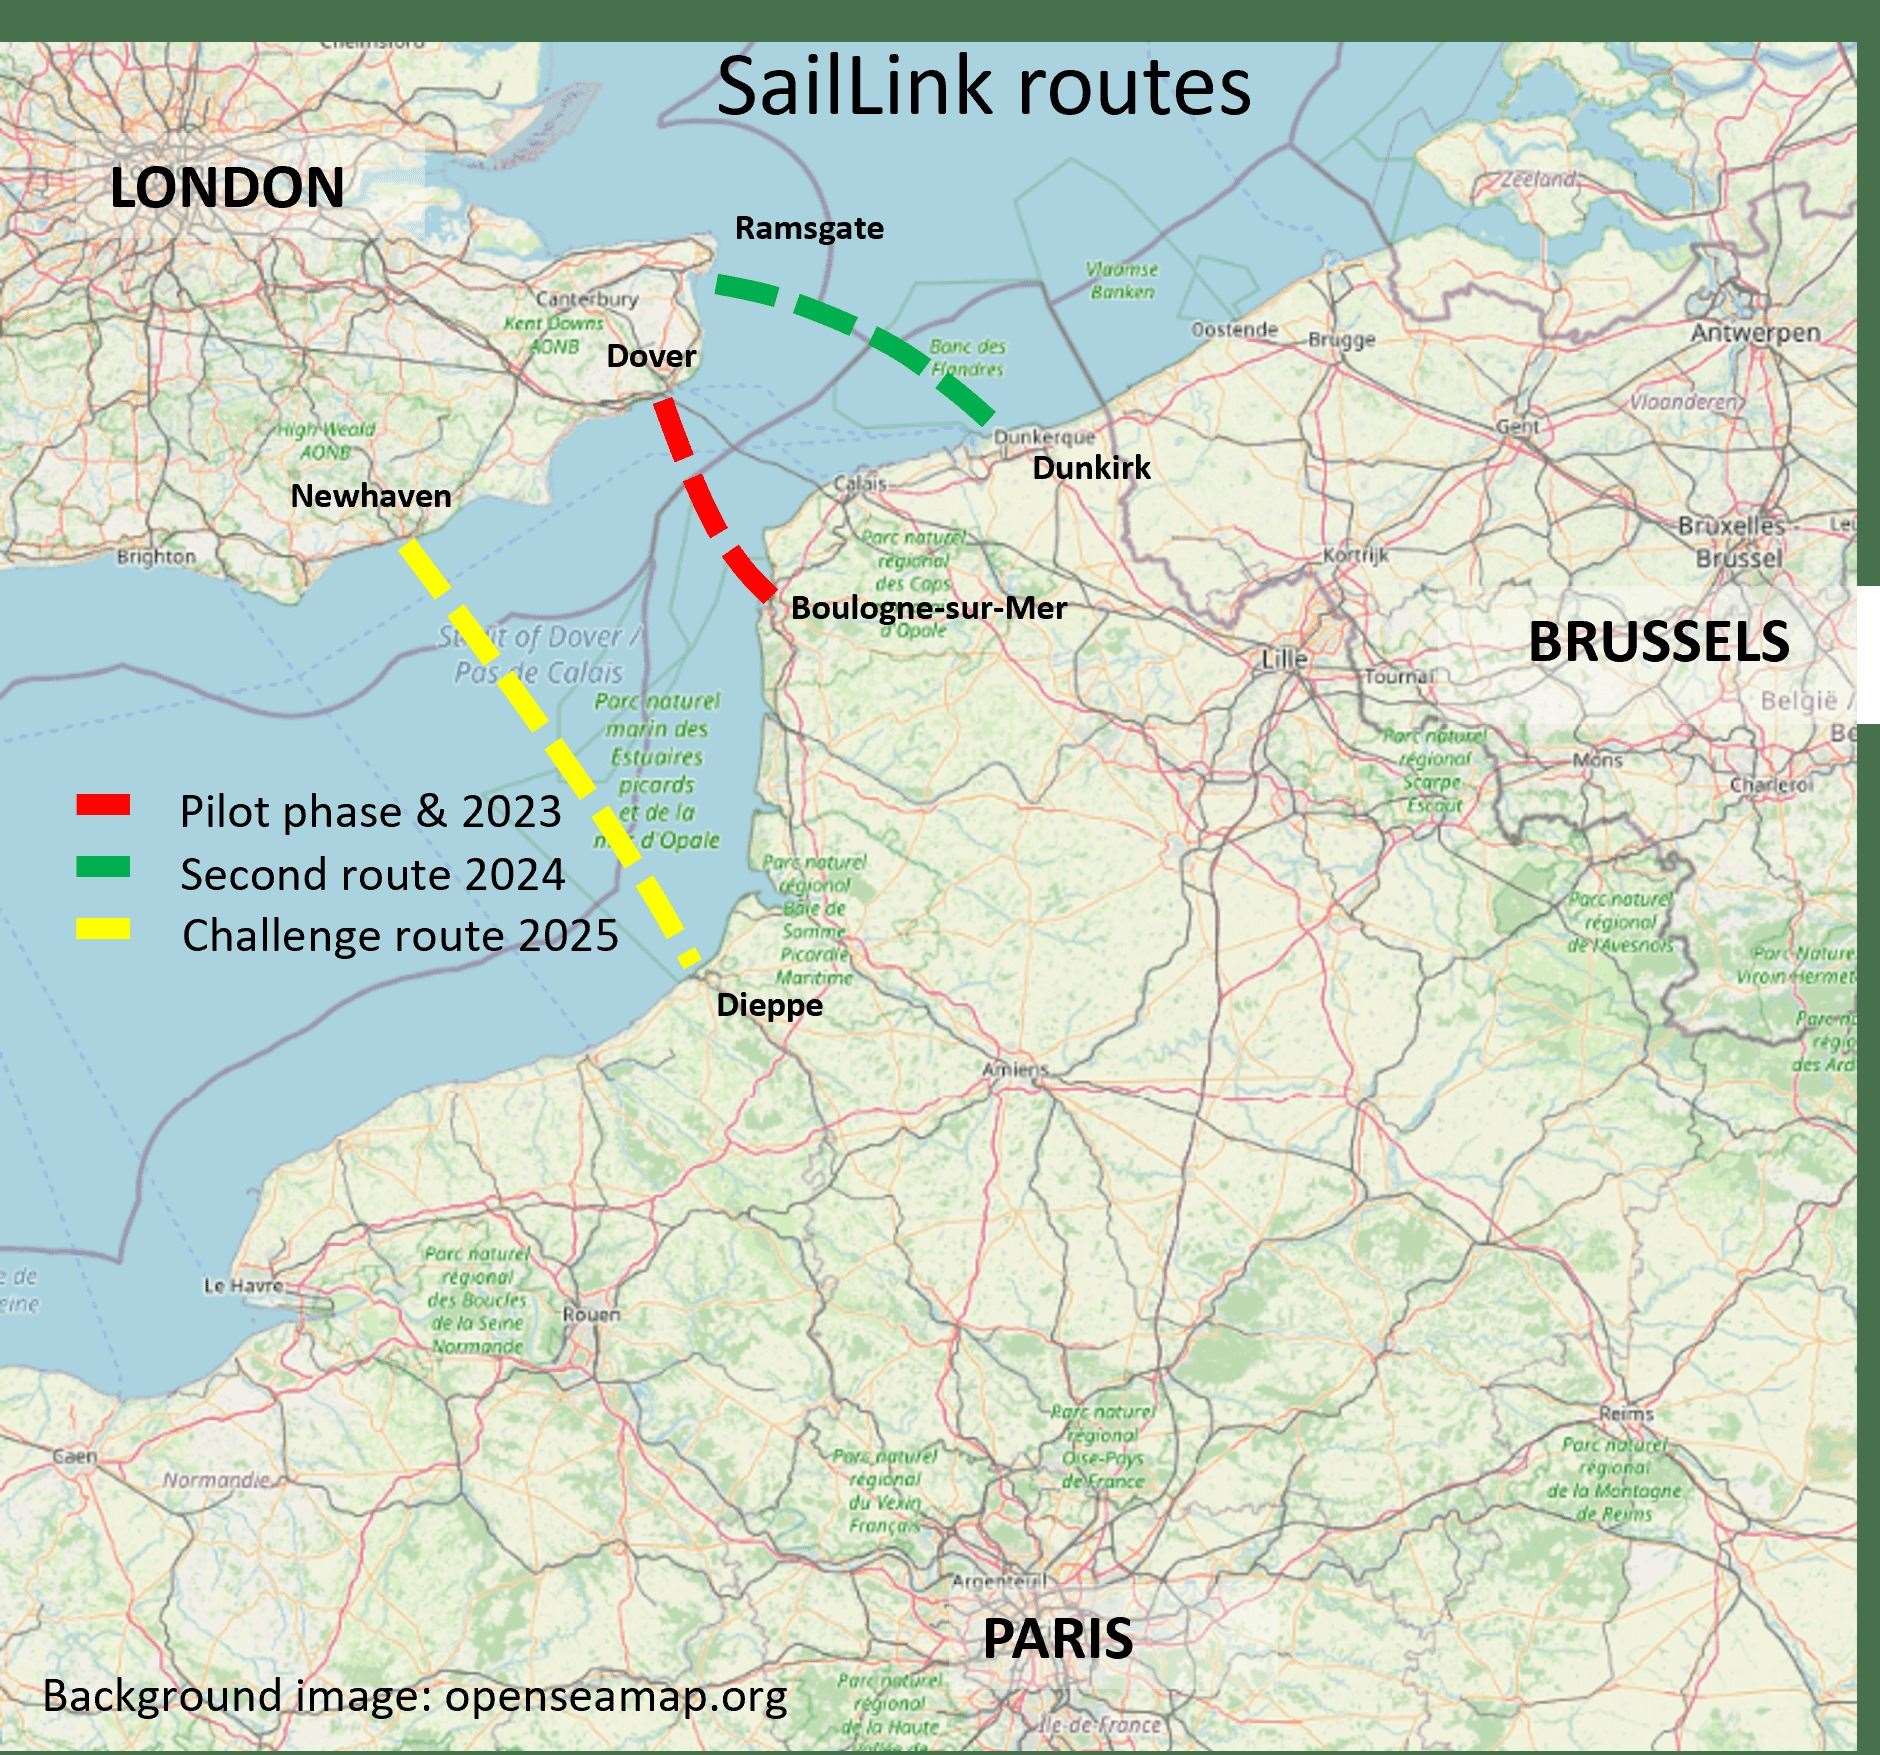 The Boulogne crossing and future potential routes for the SailLink service